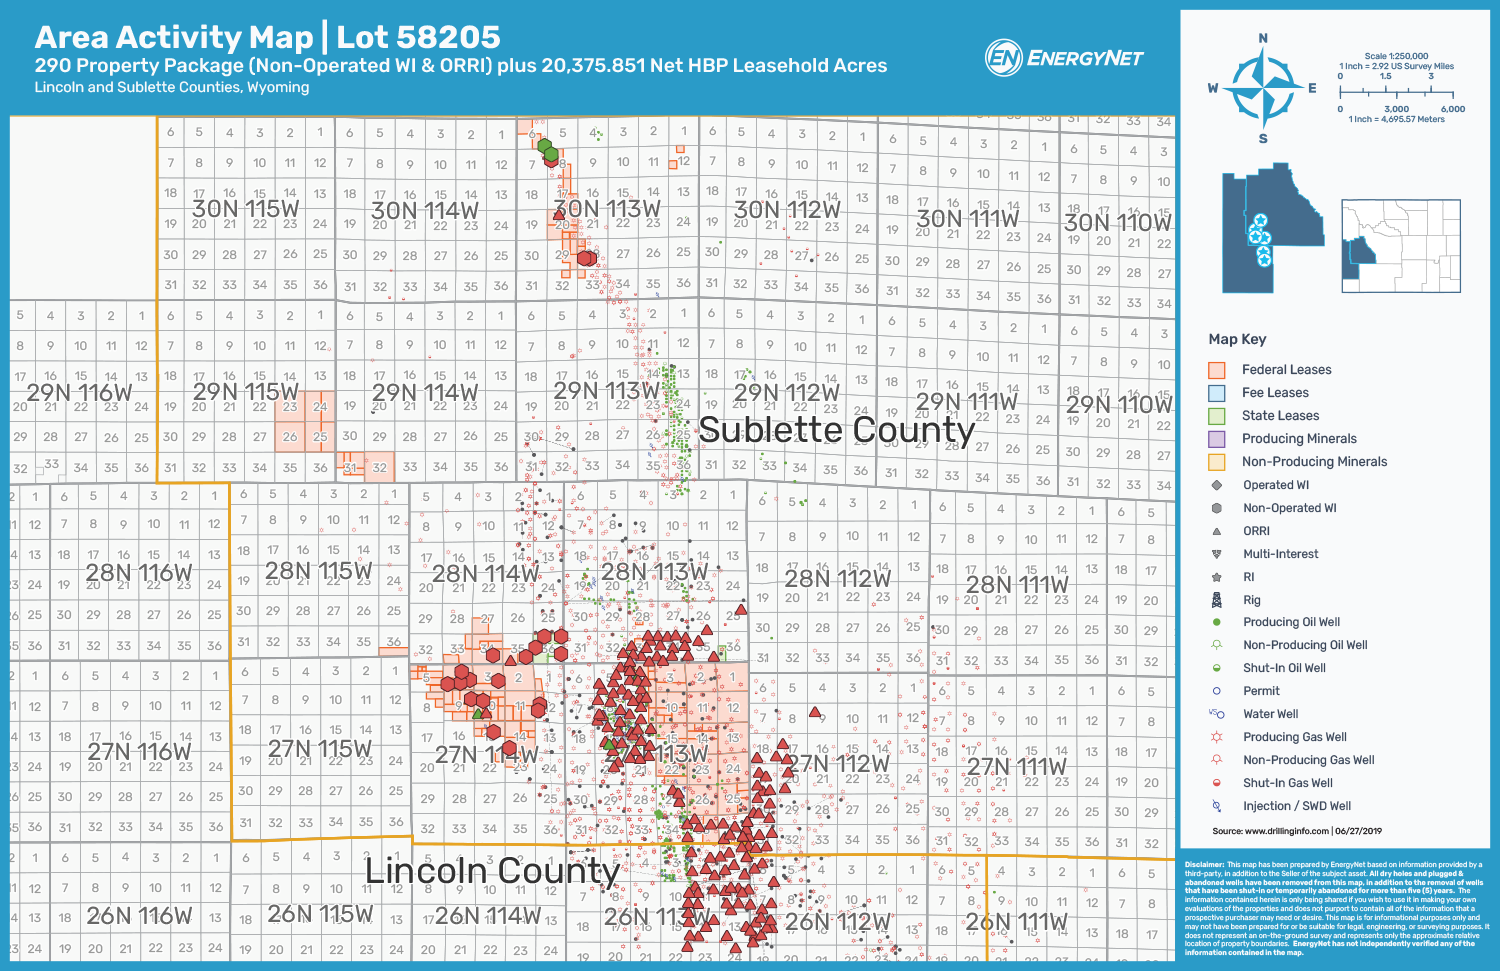 QEP Resources Western Wyoming Asset Map Lincoln And Sublette Counties (Source: EnergyNet)